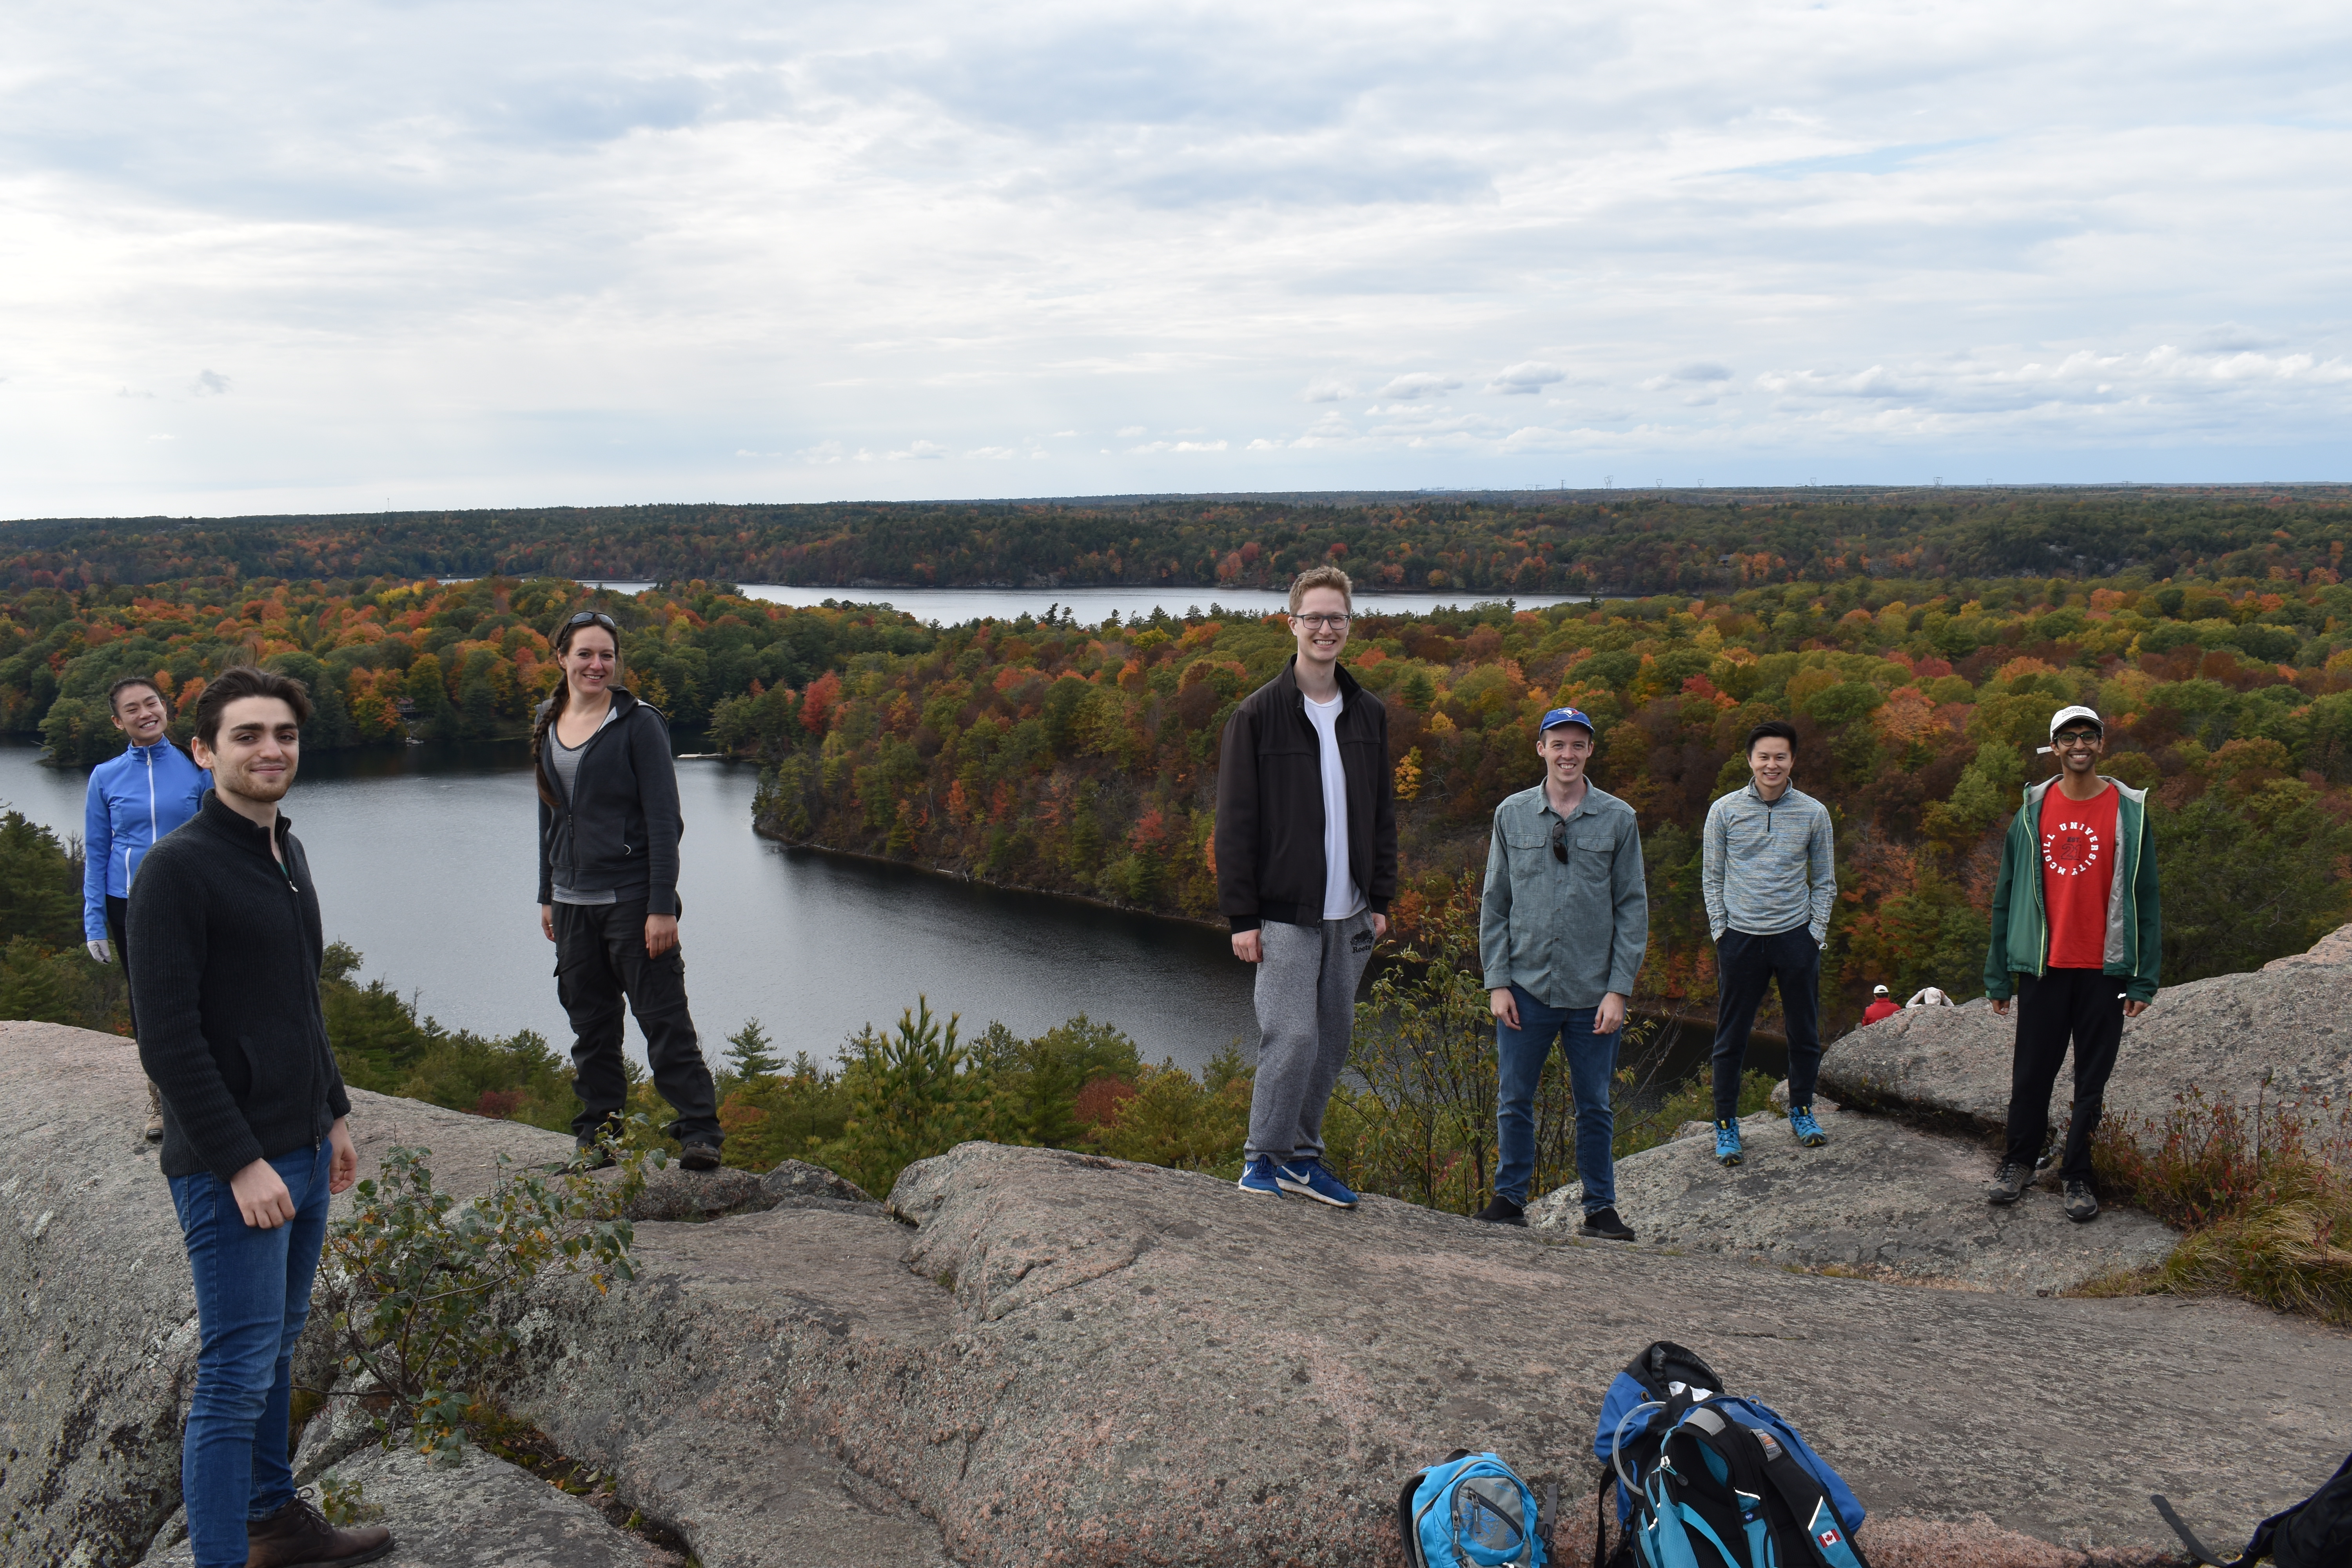 
                         Overview                                                    - 
                          Some of our residents enjoy the nature of the surrounding region during our Fall Retreat hike at Rock Dunder.                                                    